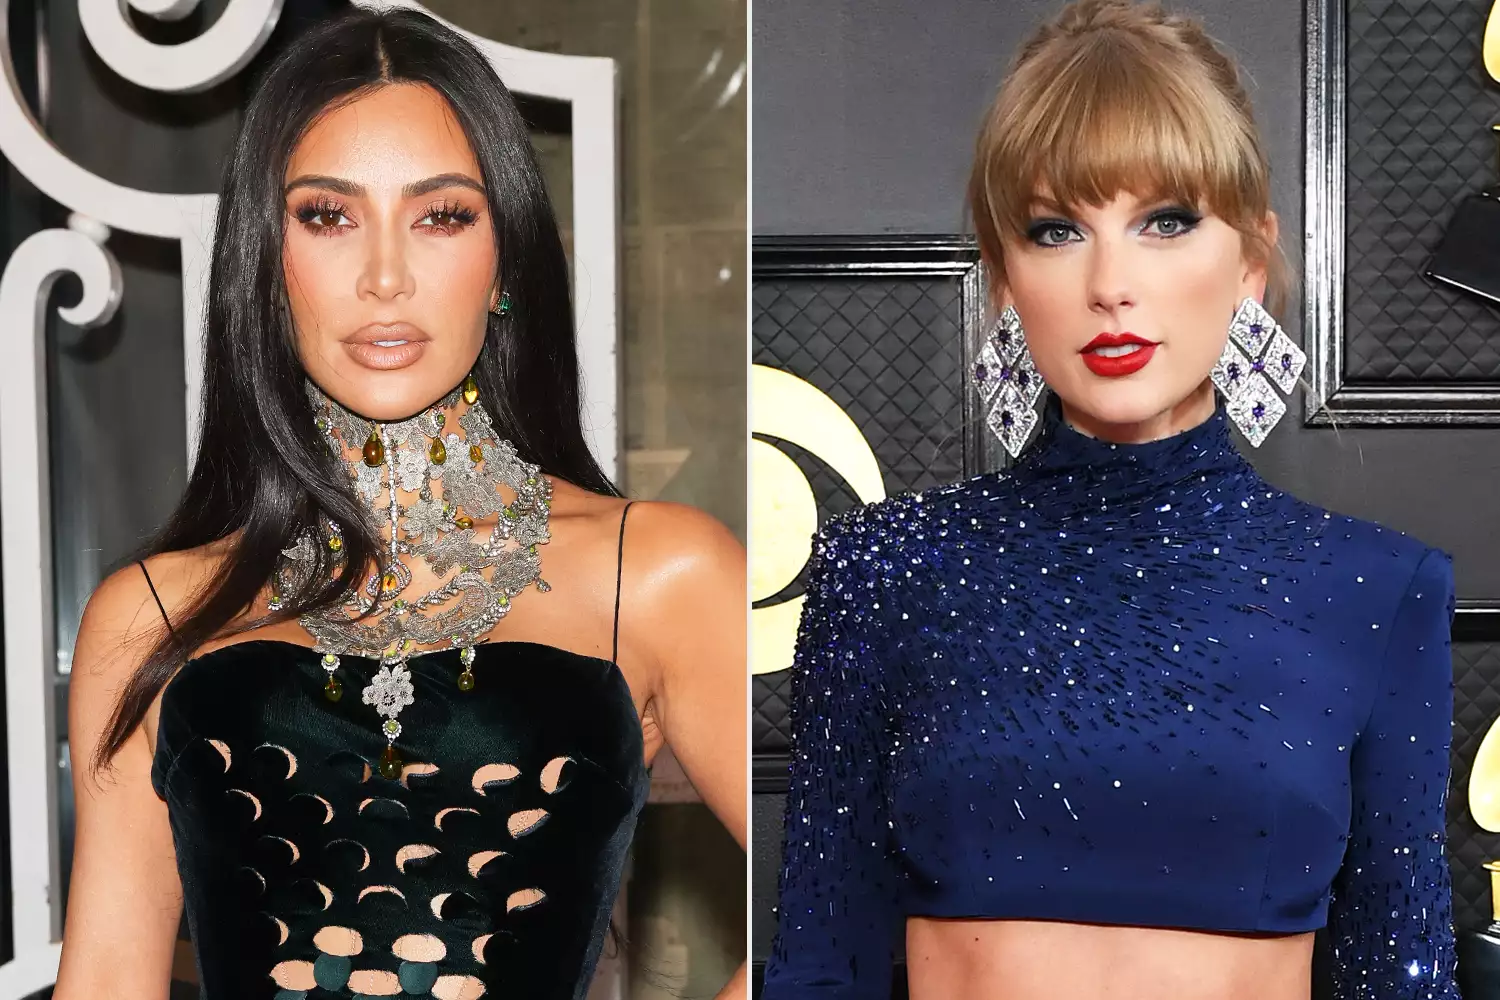 Kim Kardashian Is ‘Over’ Taylor Swift Feud and Wants Singer to ‘Move On’ After ‘thanK you aIMee’ Release: Source